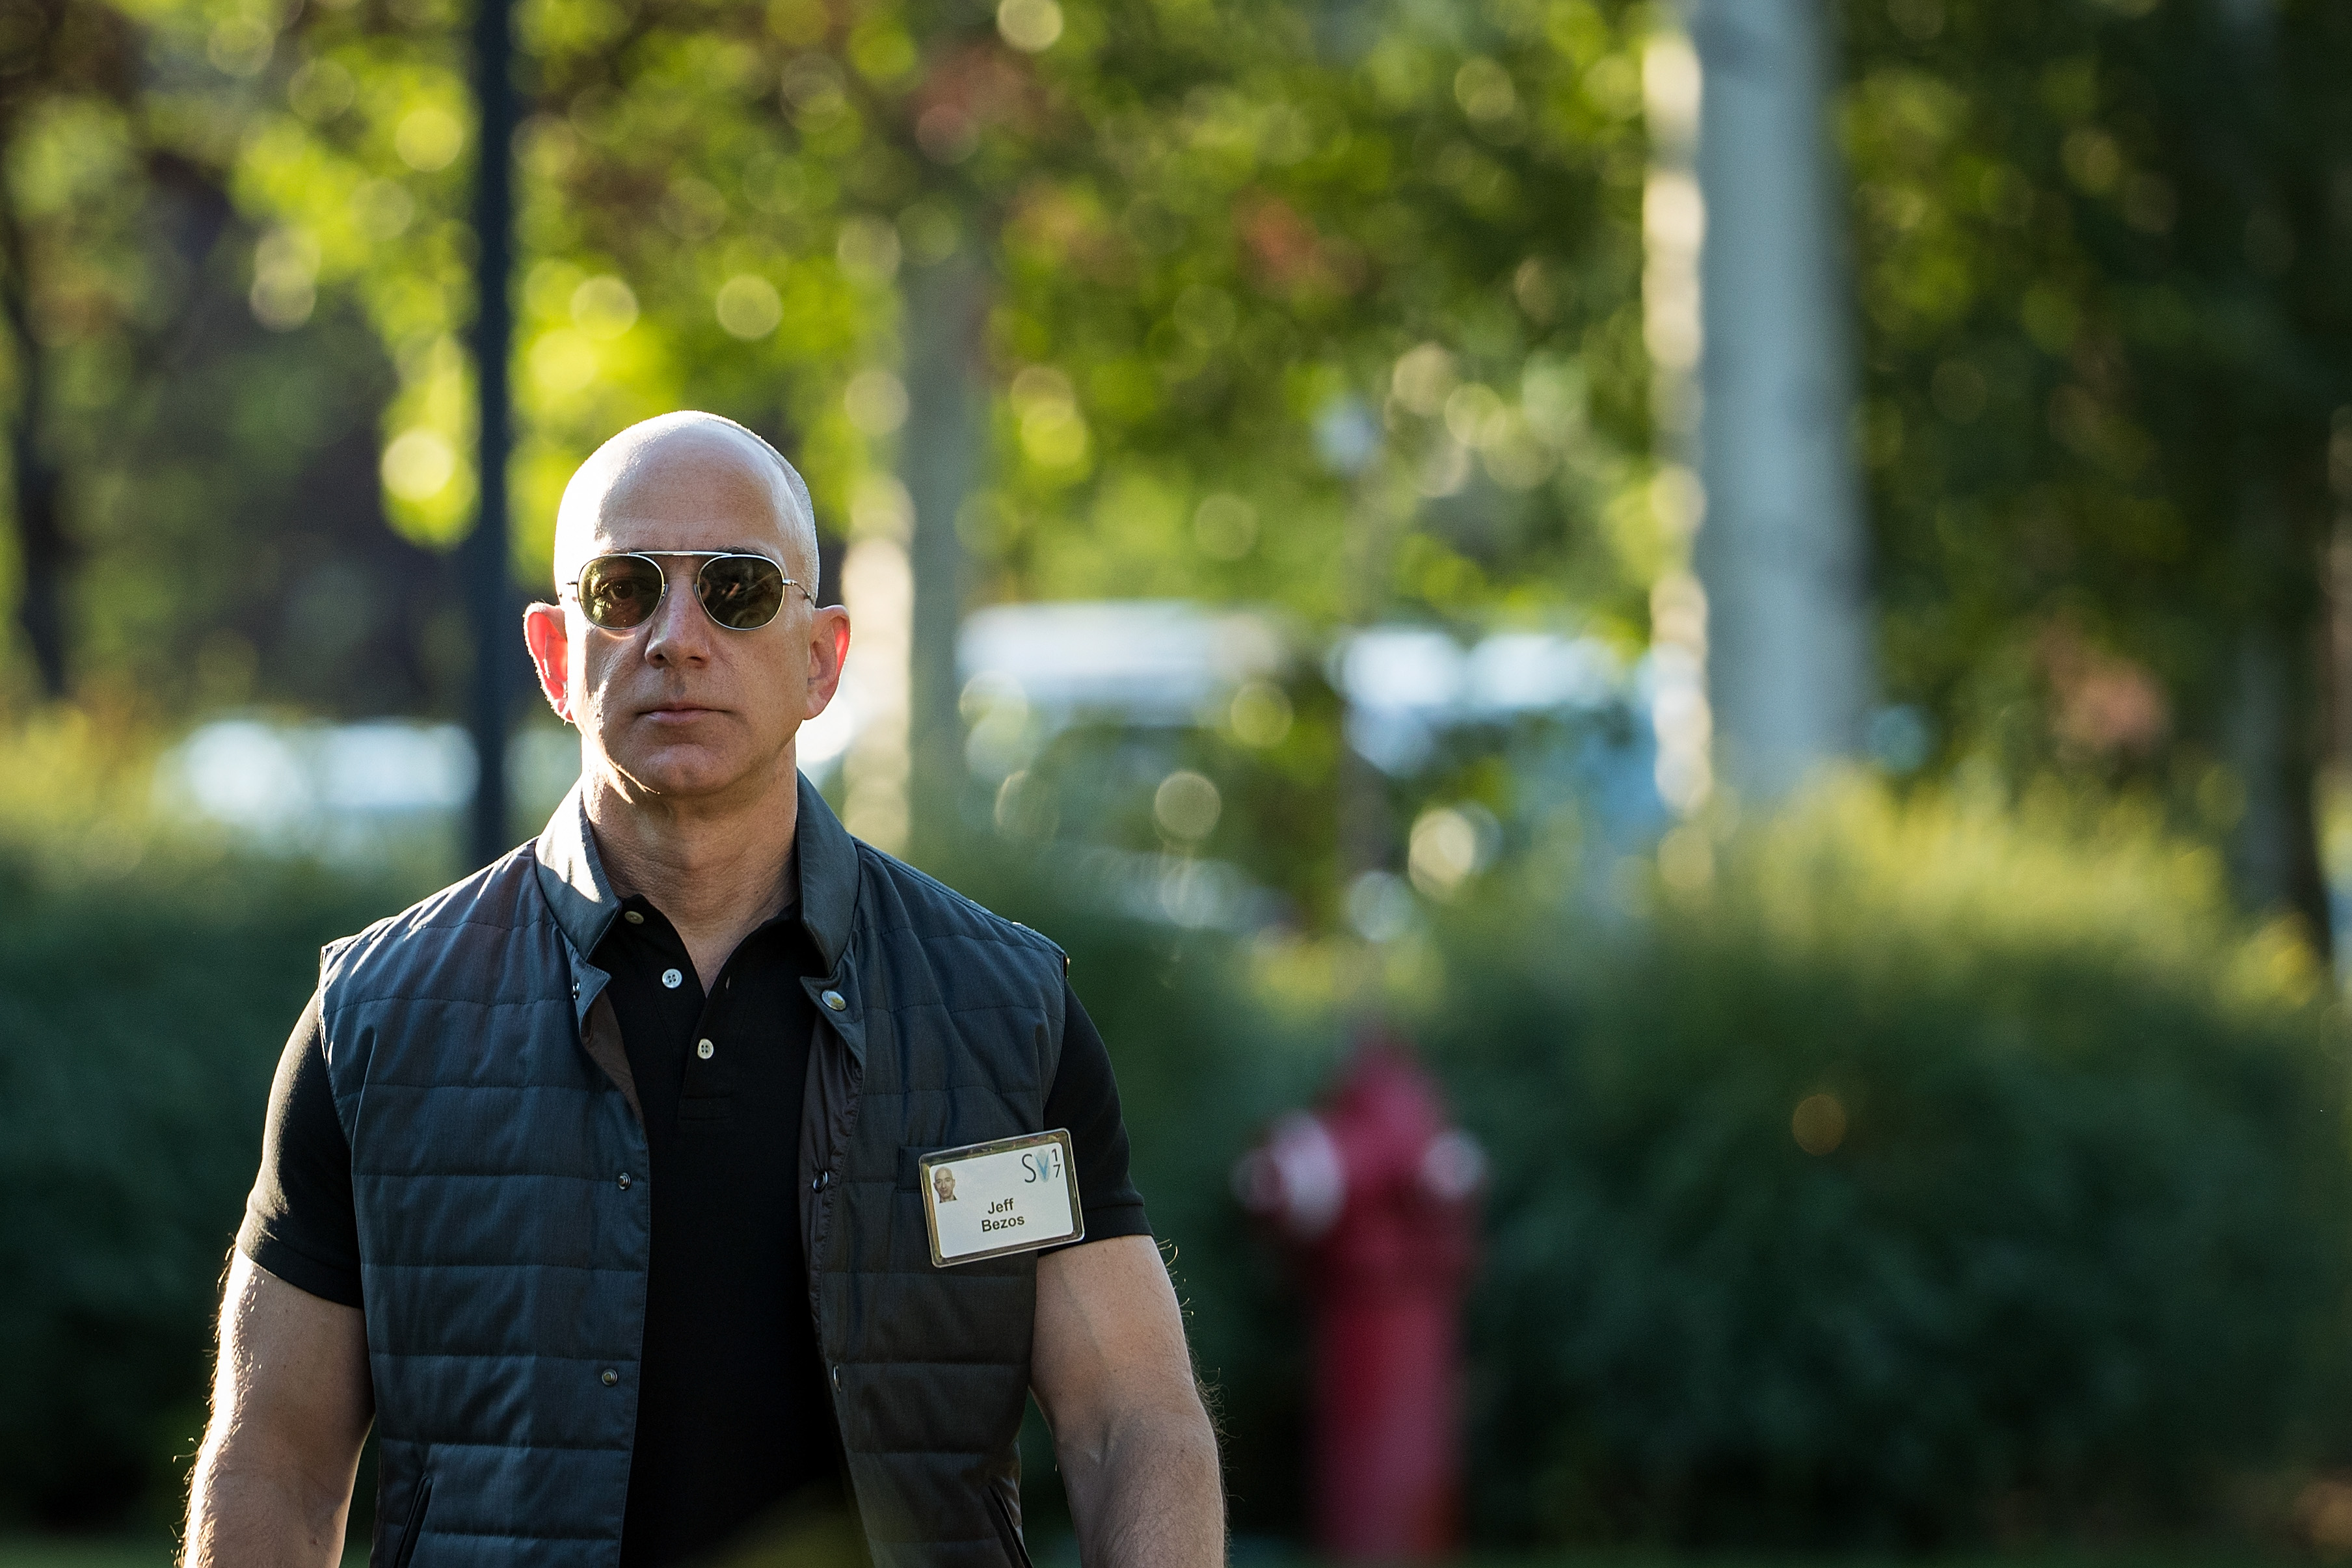 Jeff Bezos, the Richest Person on the Planet, Made $40 Billion in the Last Year